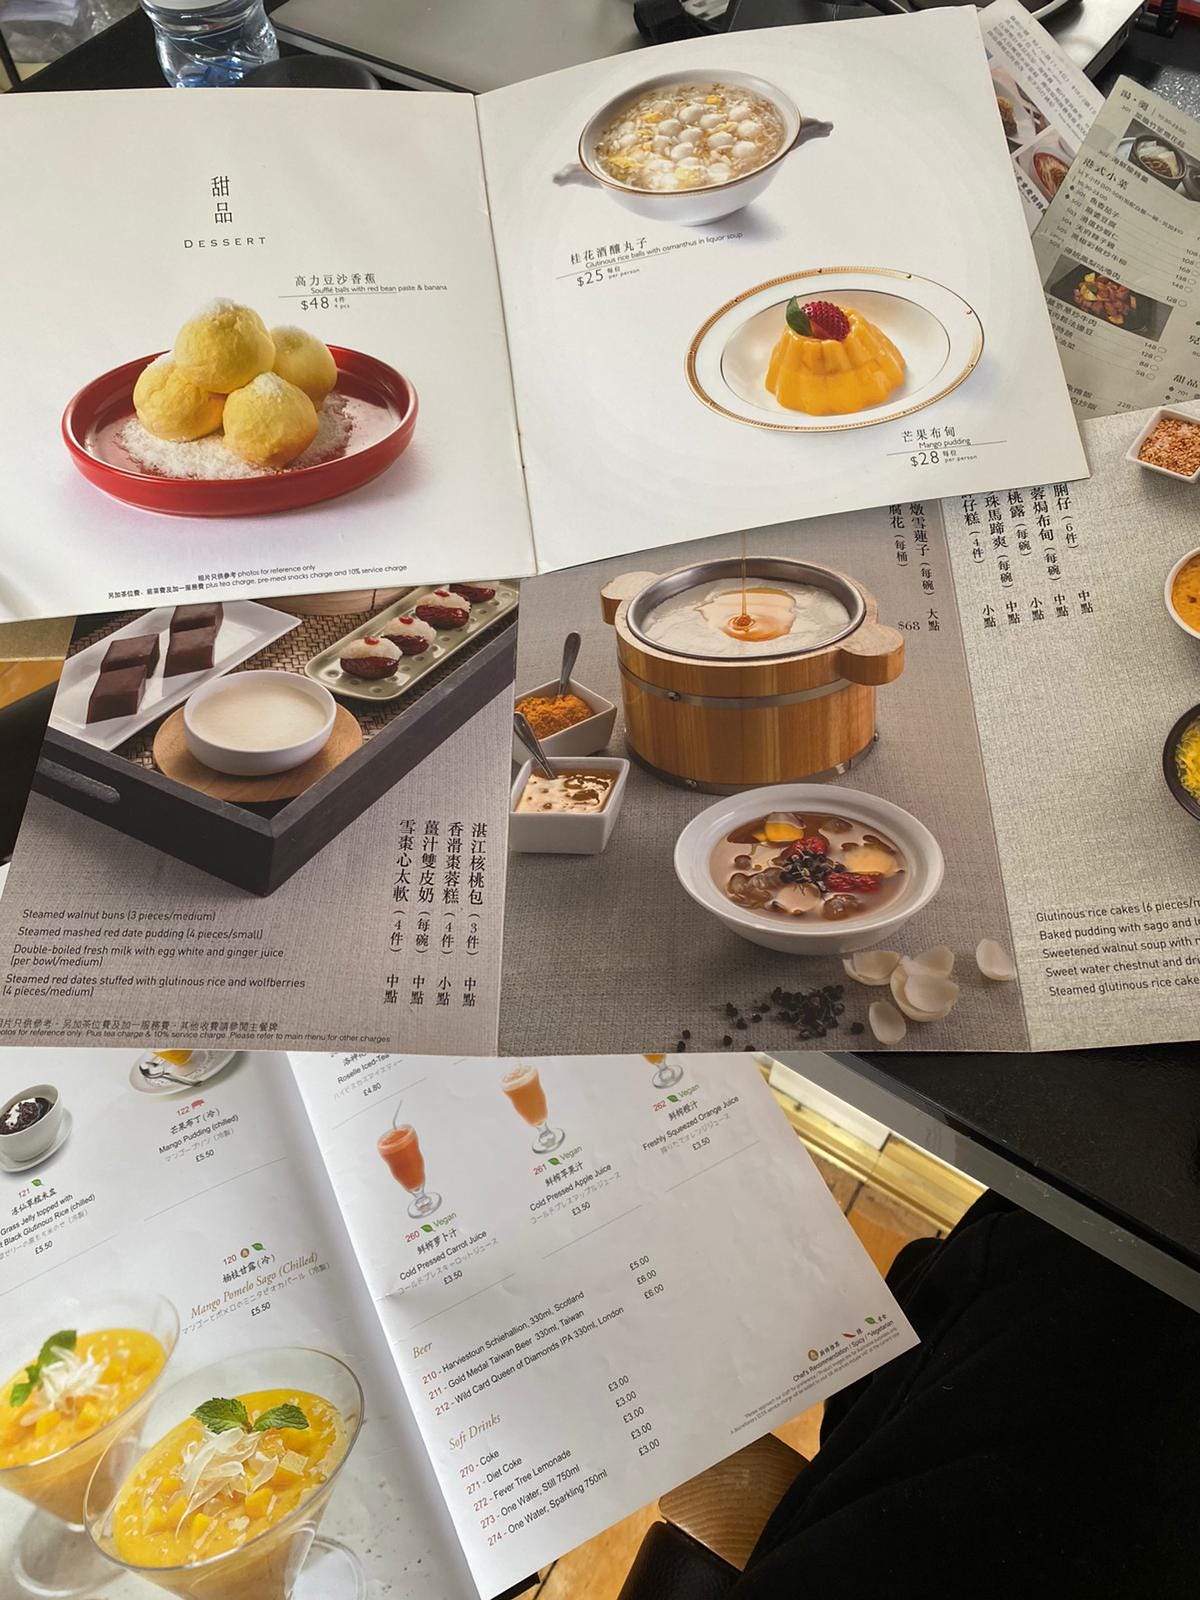 XO Soused - The (r)evolution in Chinese desserts